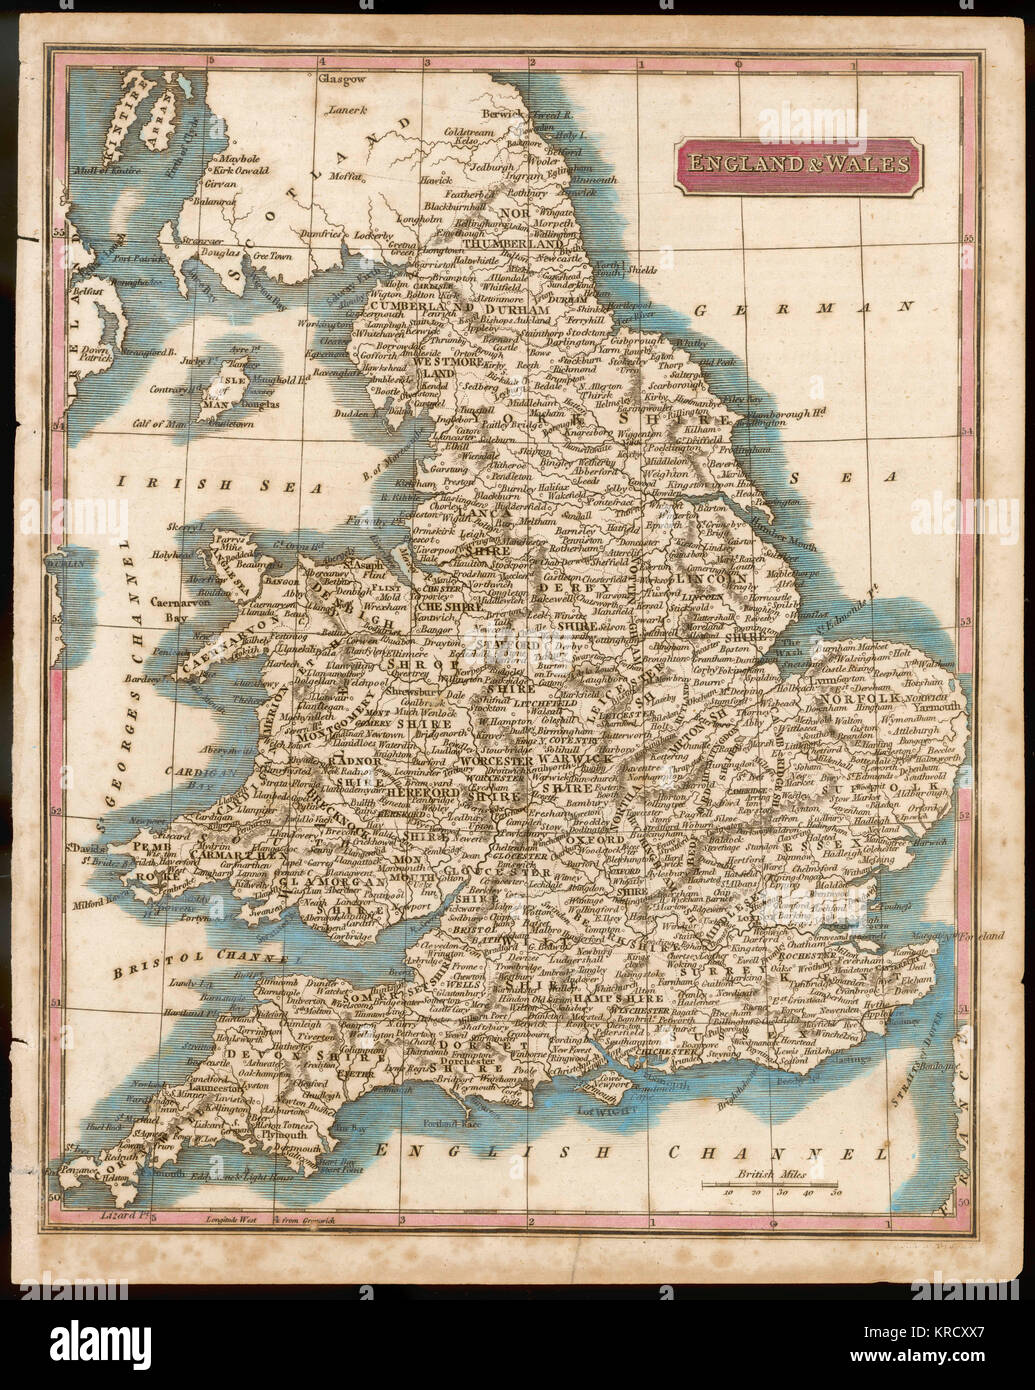 ENGLAND AND WALES Hand coloured engraving.        Date: Circa 1809 Stock Photo